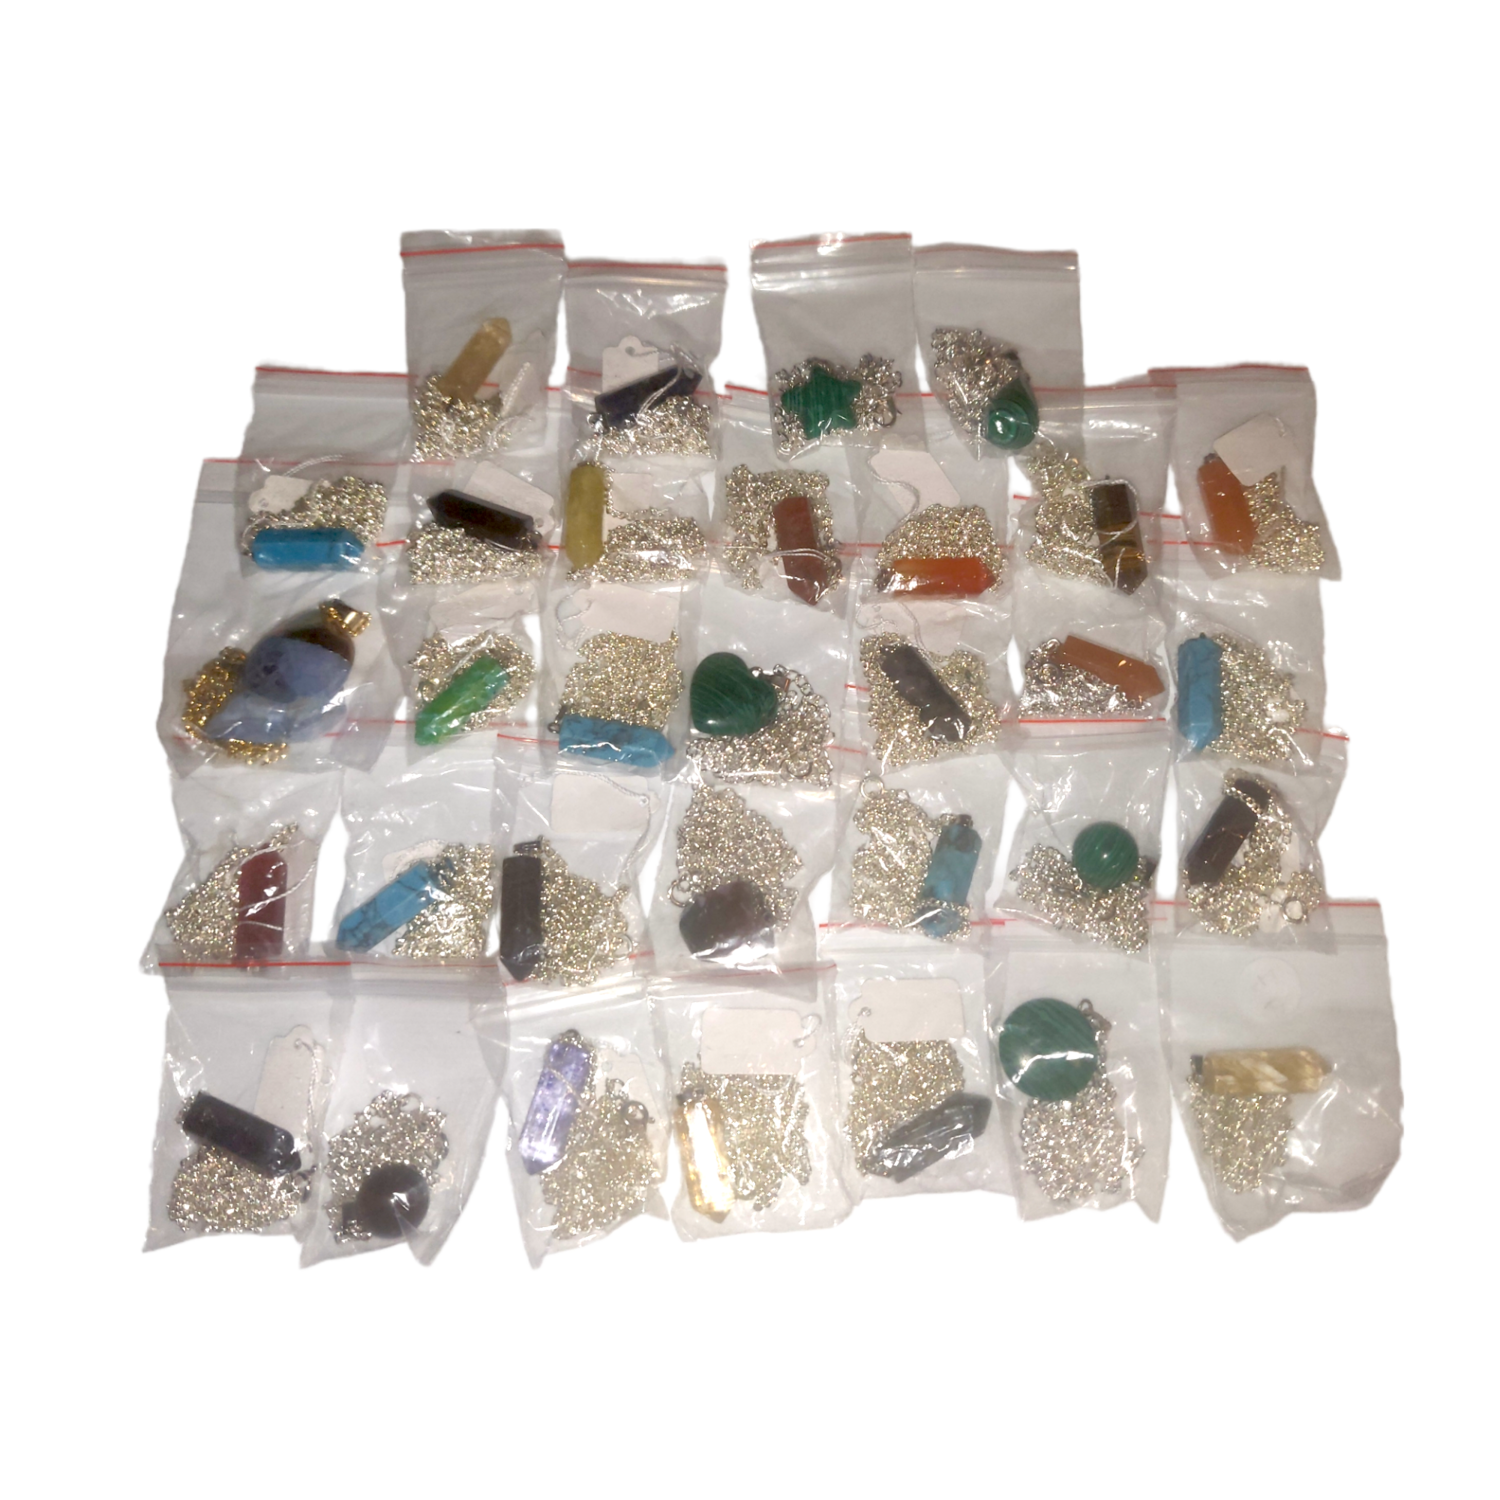 10x Mixed Gemstone Pendants with Silver Coloured Metal Necklaces (Random)